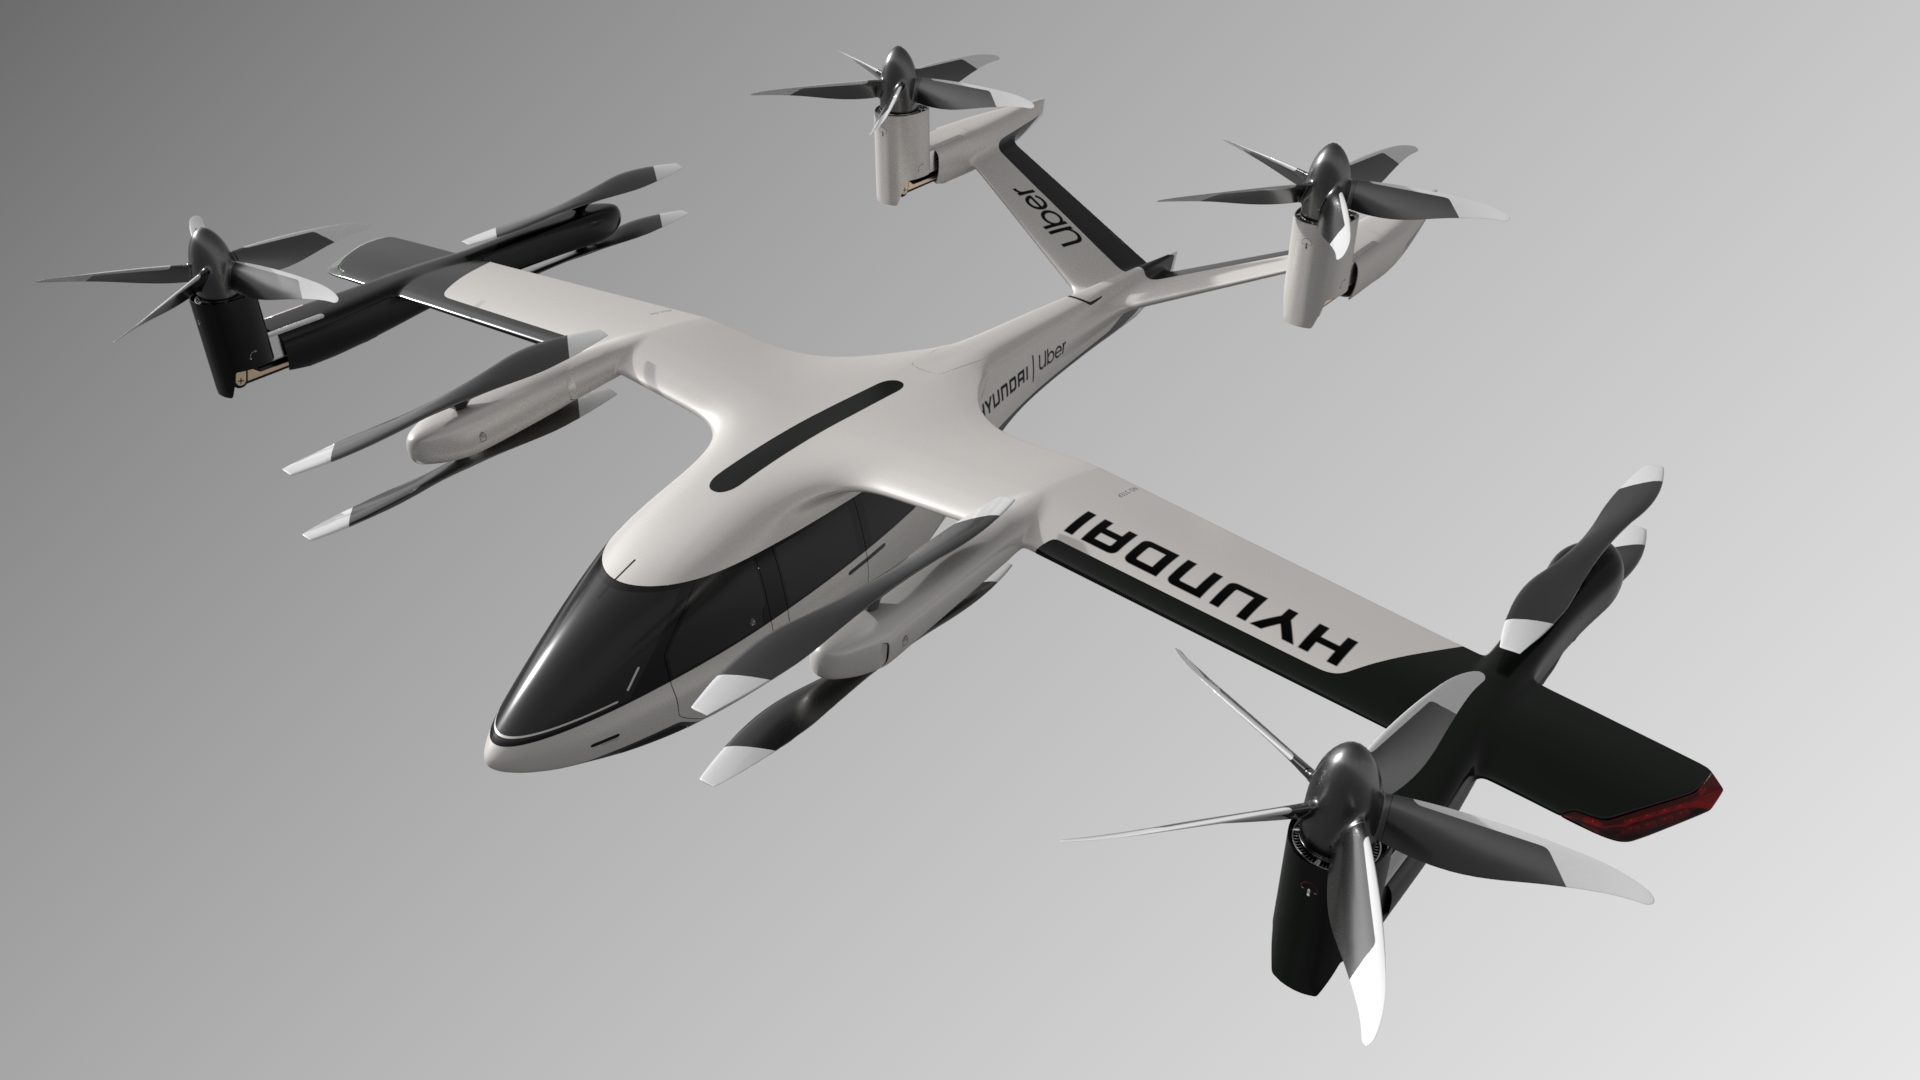 Image for Hyundai Motor Group’s Urban Air Mobility Vision Concept Named “Best Innovations In 2020” By Etisalat